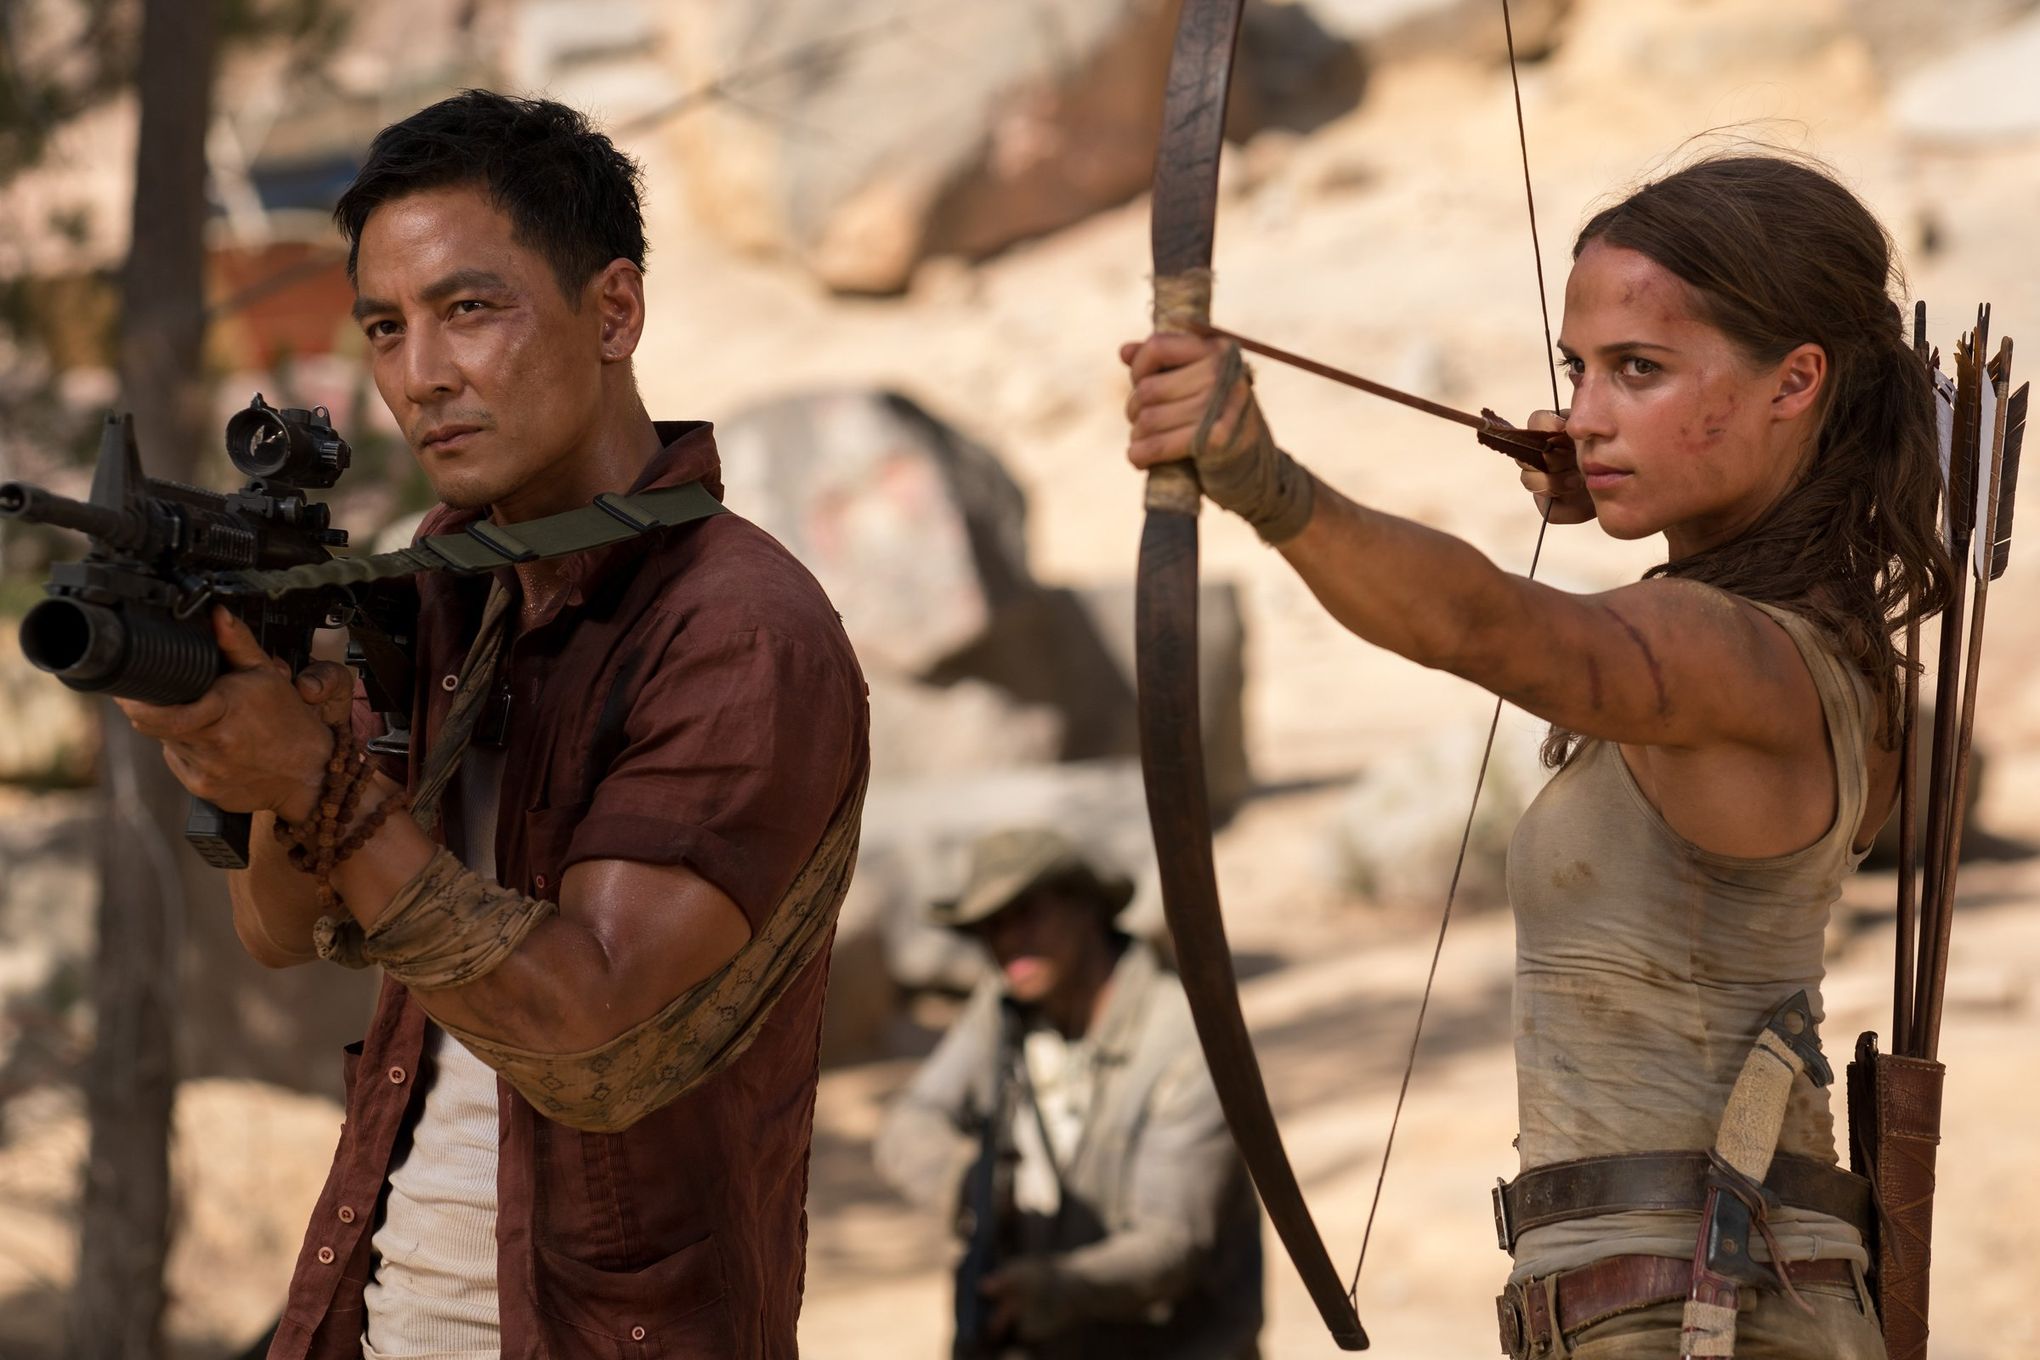 Did anyone ask for a new “Tomb Raider” movie? Regardless, it's not so bad